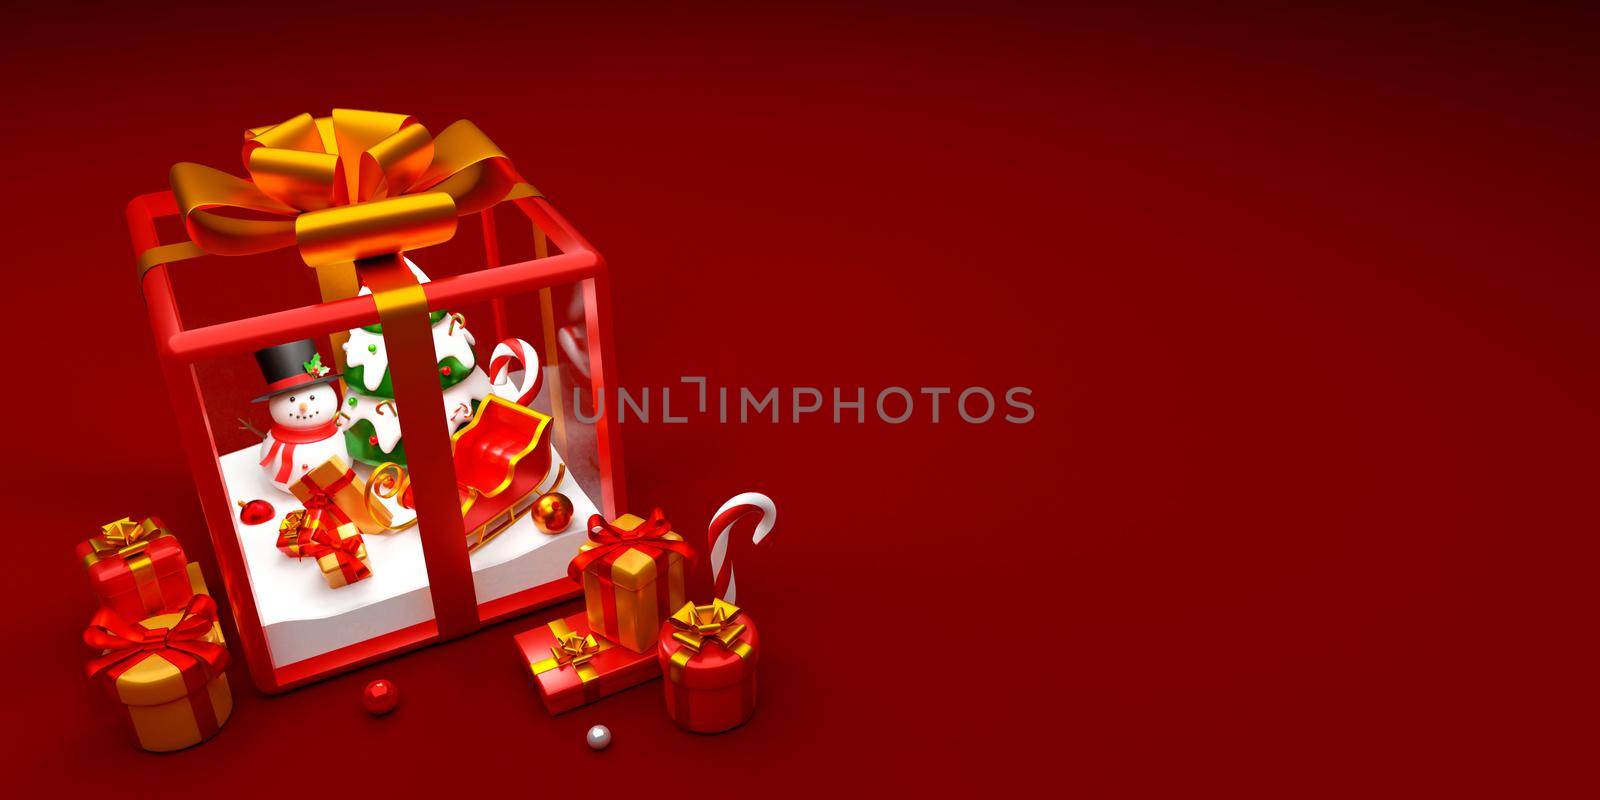 Snowman and Christmas tree within gift box, 3d illustration by nutzchotwarut